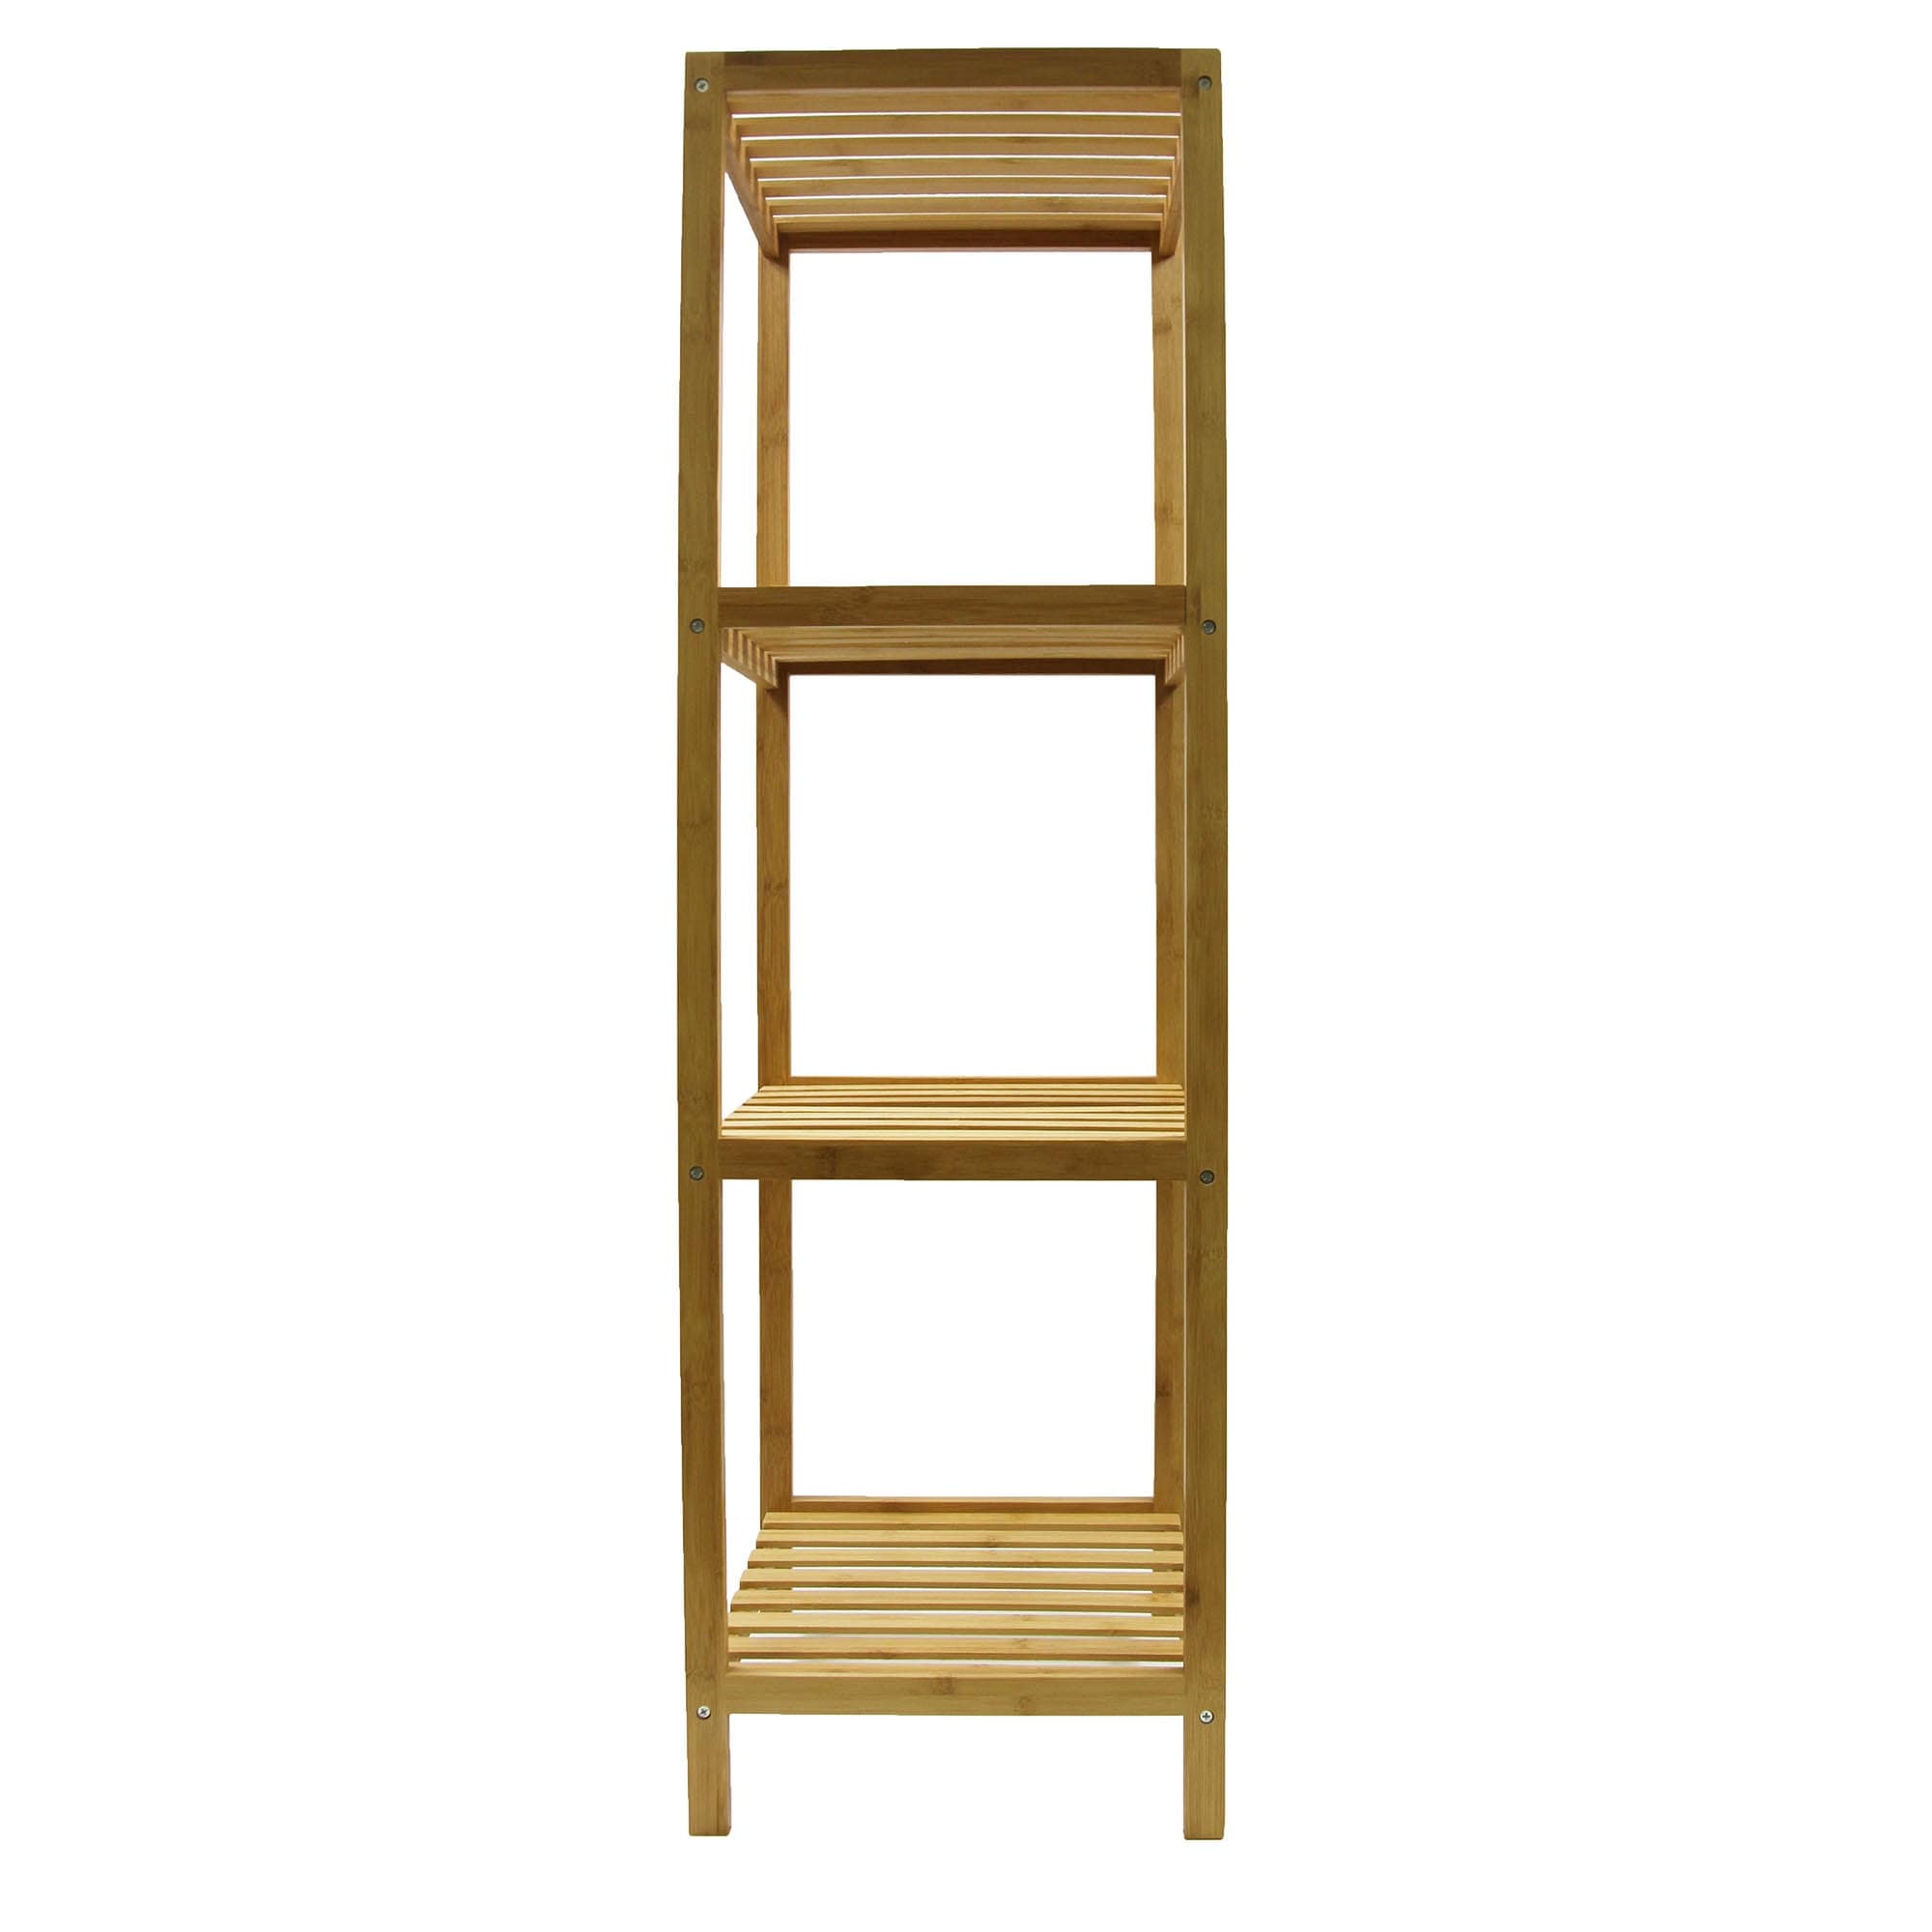 https://ak1.ostkcdn.com/images/products/is/images/direct/fdf221ef8921a0b6795c0a05bb0d7b8aae329a36/Bath-Multi-Use-Shelving-Unit-Tower-4-or-3-Shelves-Ecobio-Bamboo.jpg